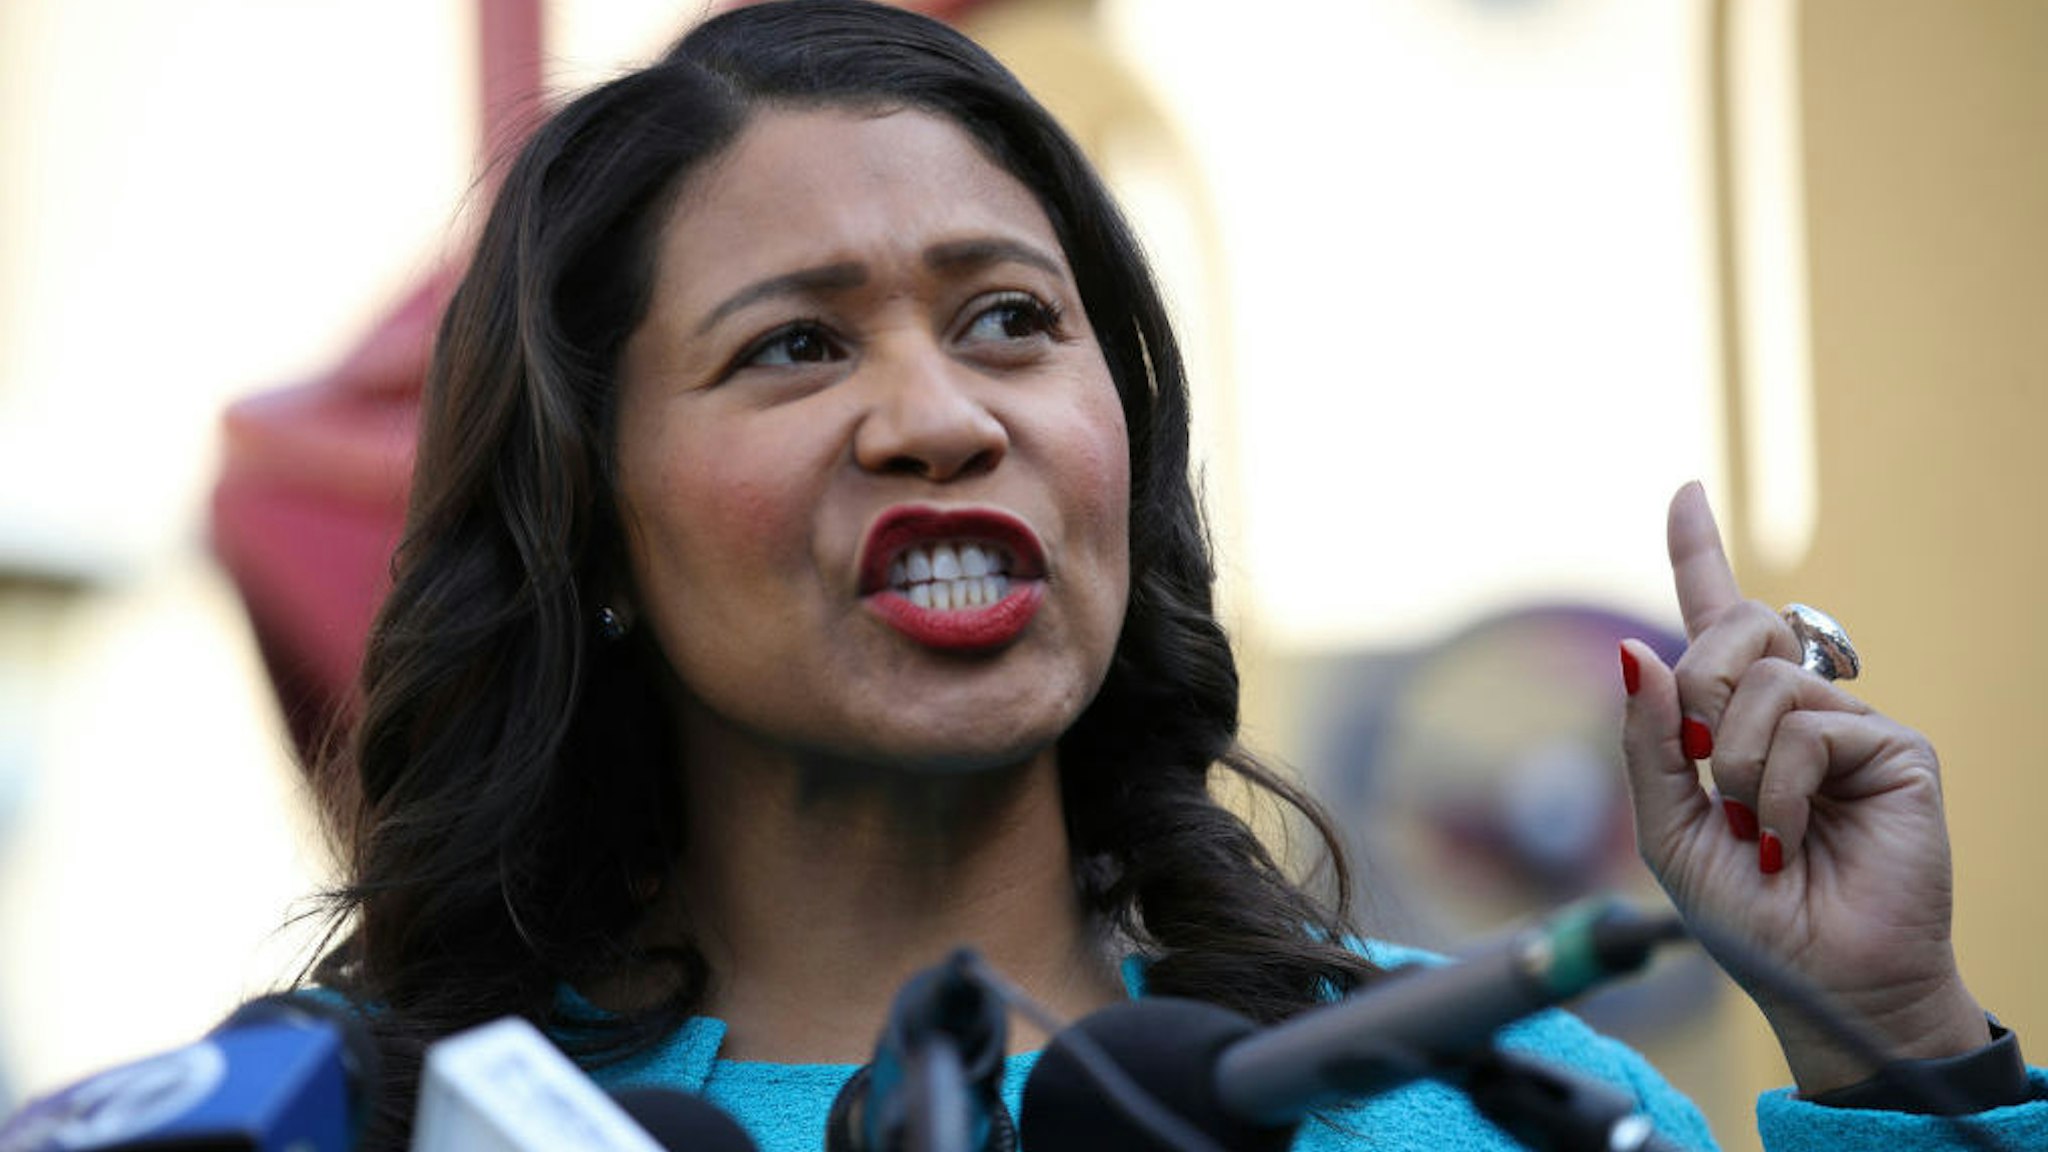 SAN FRANCISCO, CALIFORNIA - NOVEMBER 21: San Francisco mayor London Breed speaks during a press conference at Hamilton Families on November 21, 2019 in San Francisco, California. YouTube CEO Susan Wojcicki and her husband Dennis Troper joined Breed and Google.org representatives to announce that they would be donating a combined $1.35 million to Hamilton Families, a San Francisco based non-profit that provides long-term housing solutions to homeless families.